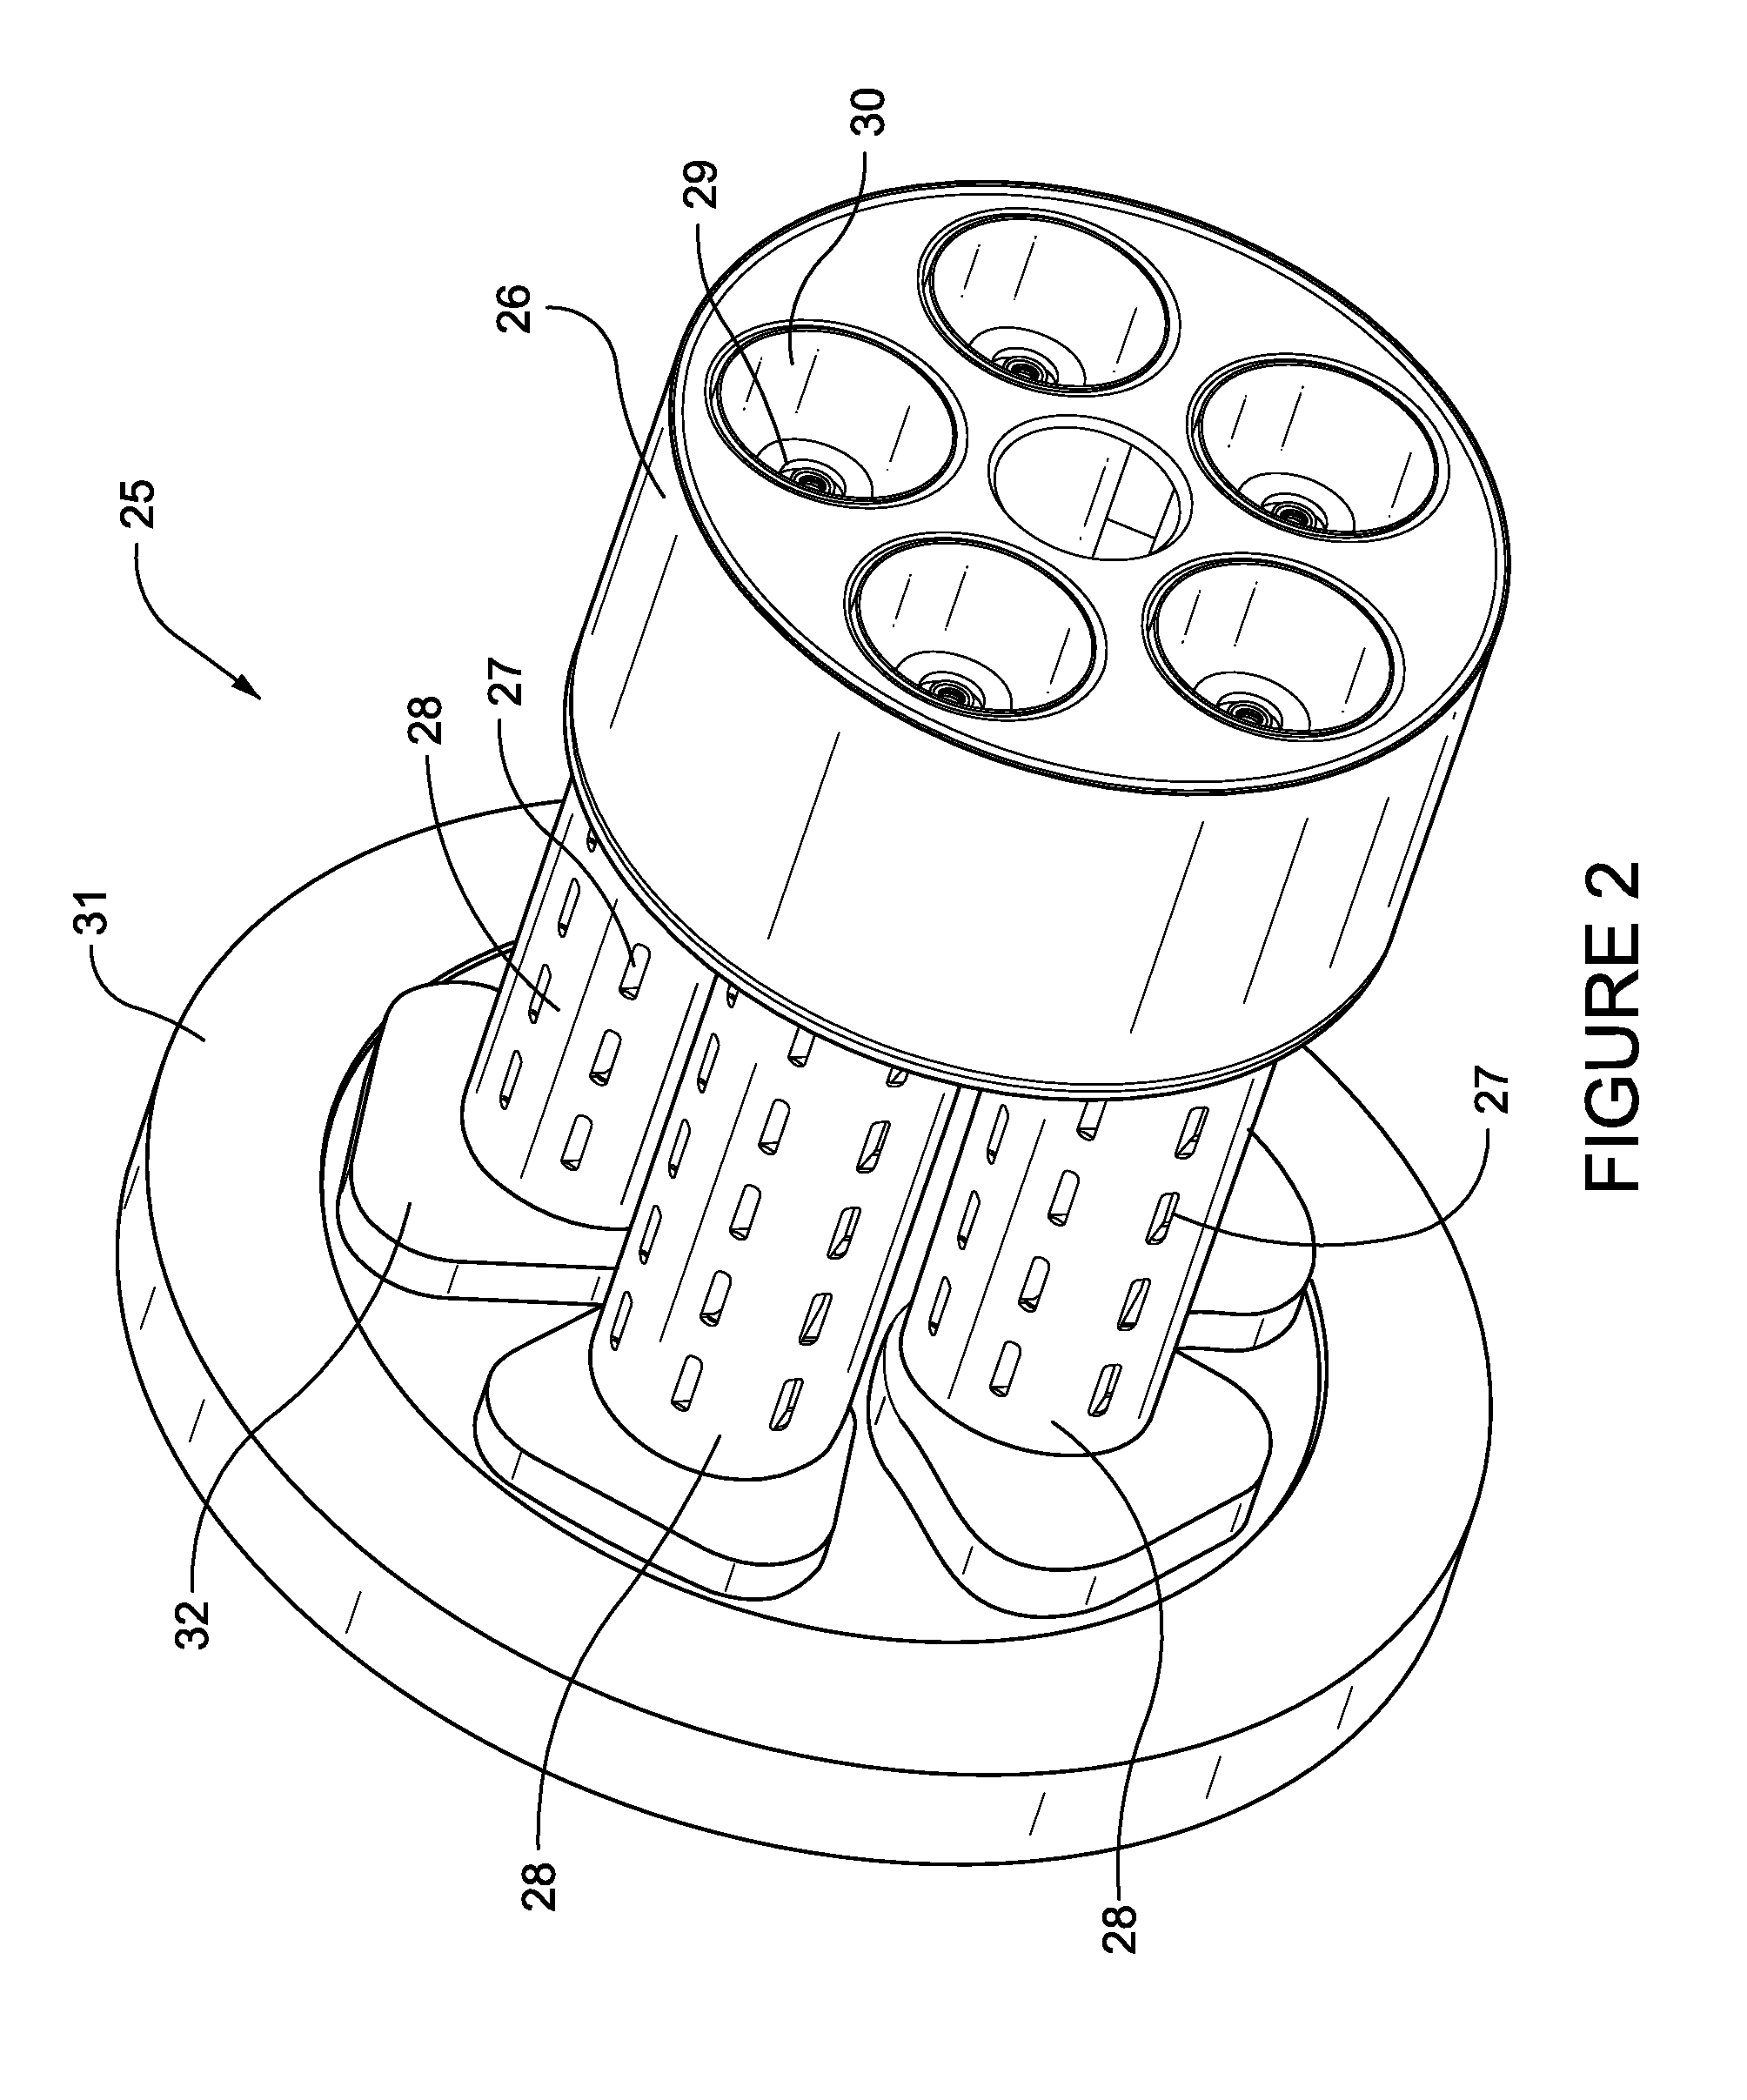 Pocketed air and fuel mixing tube